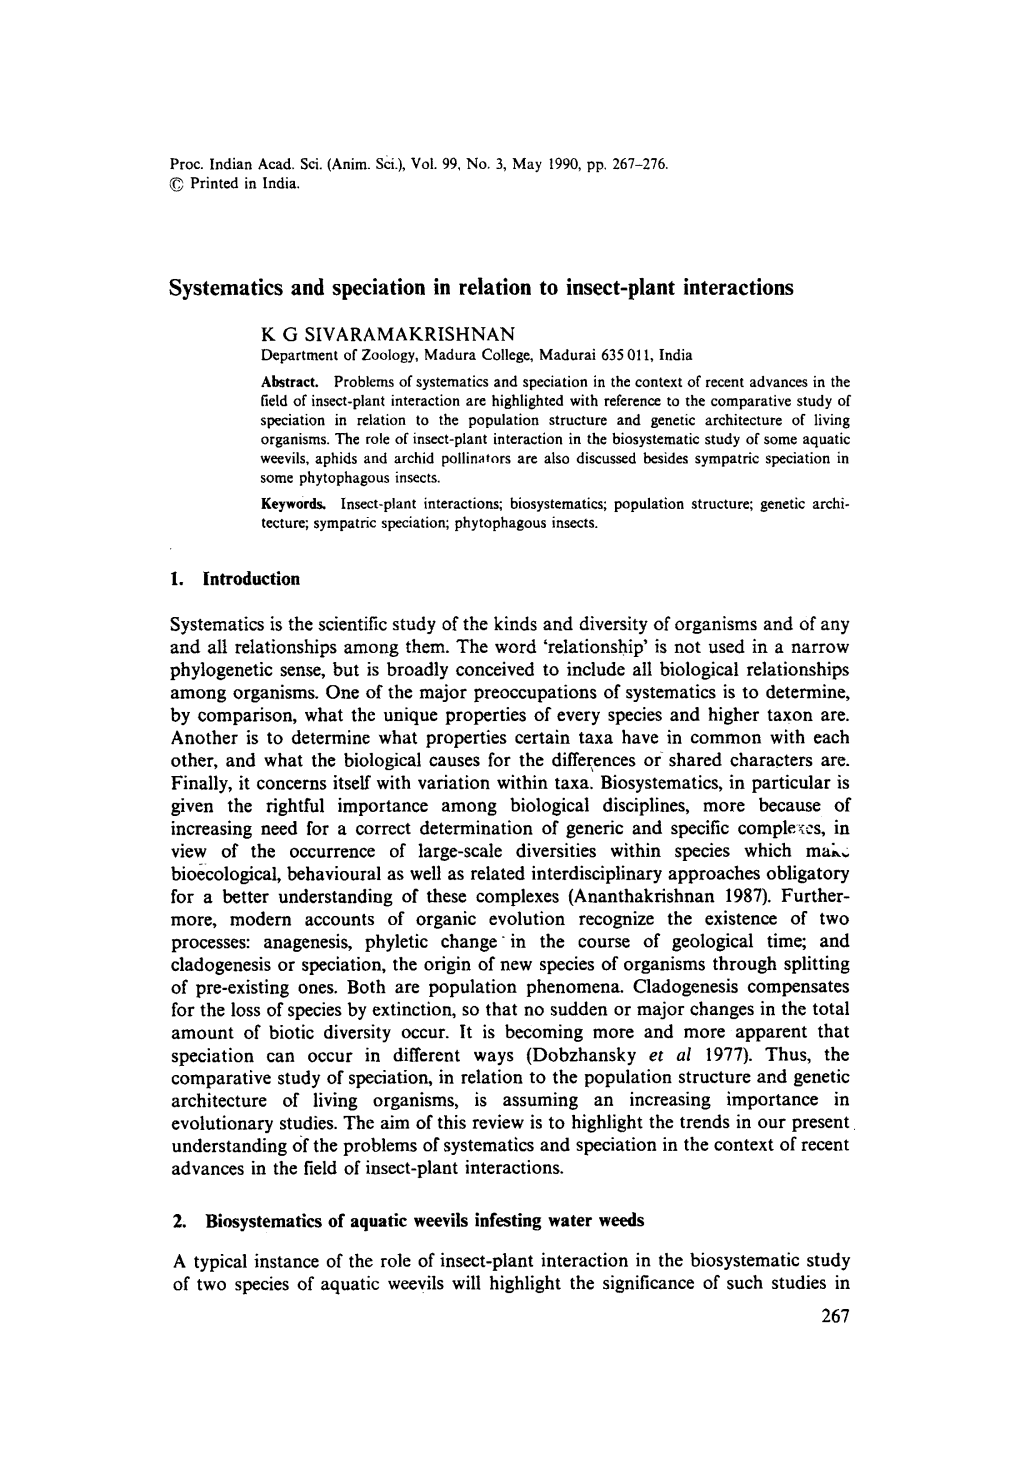 Systematics and Speciation in Relation to Insect-Plant Interactions